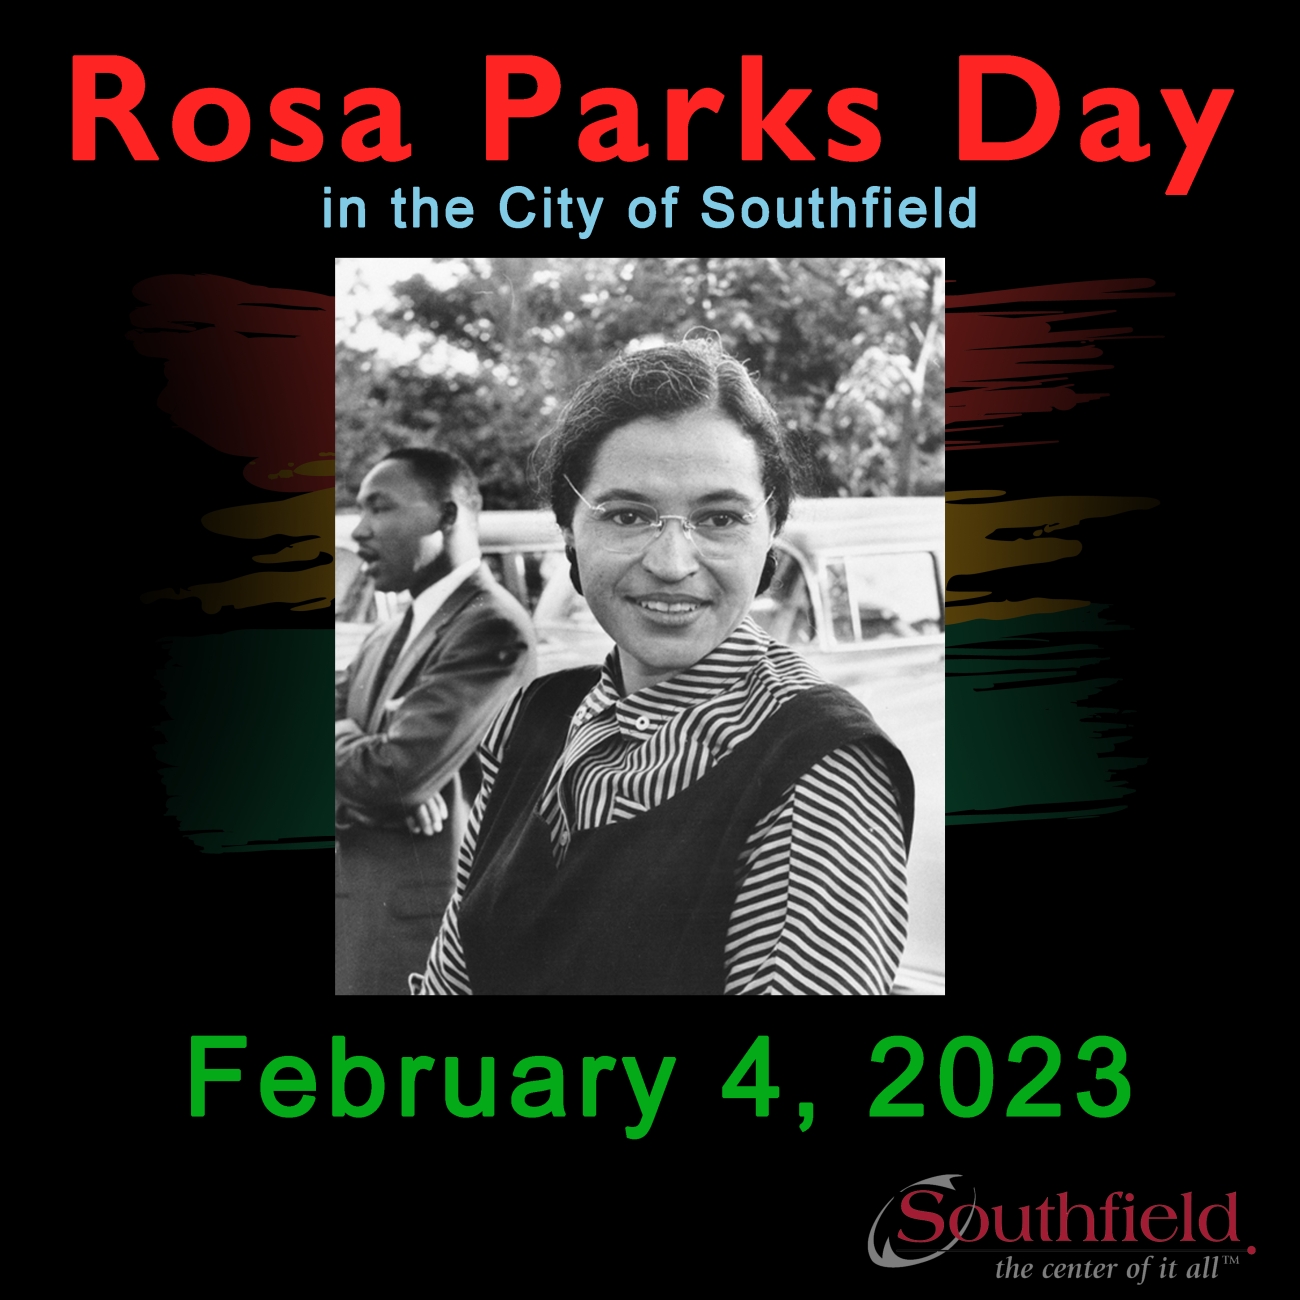 "Rosa Parks Day" in the City of Southfield declared on Februrary 4